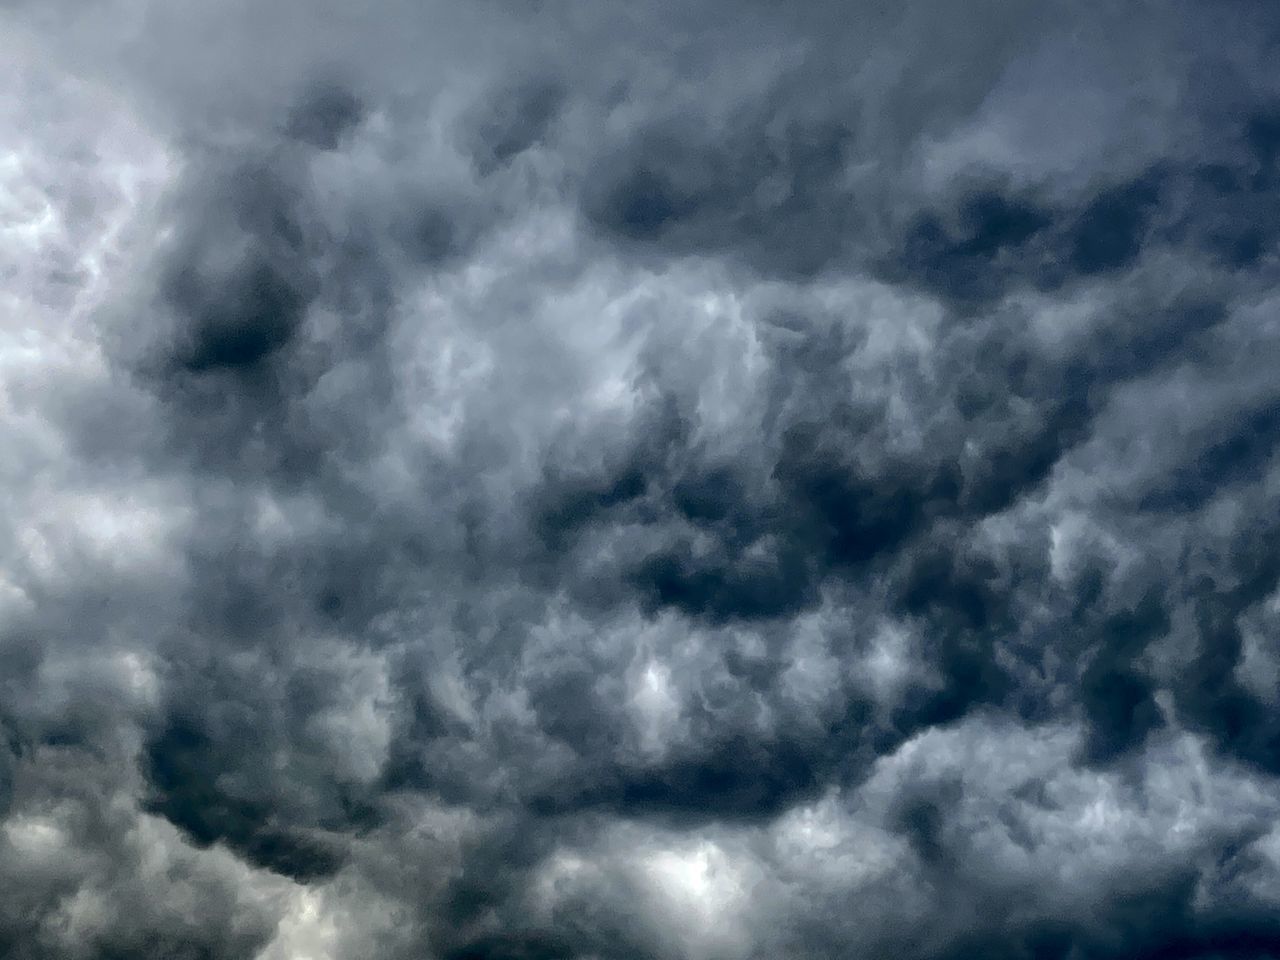 sky, cloud, storm, cloudscape, dramatic sky, storm cloud, overcast, backgrounds, wind, black and white, nature, environment, atmosphere, beauty in nature, thunderstorm, no people, monochrome, daytime, moody sky, dark, meteorology, scenics - nature, climate, ominous, wet, outdoors, blue, curve, rain, gray, fluffy, white, sign, warning sign, cumulonimbus, darkness